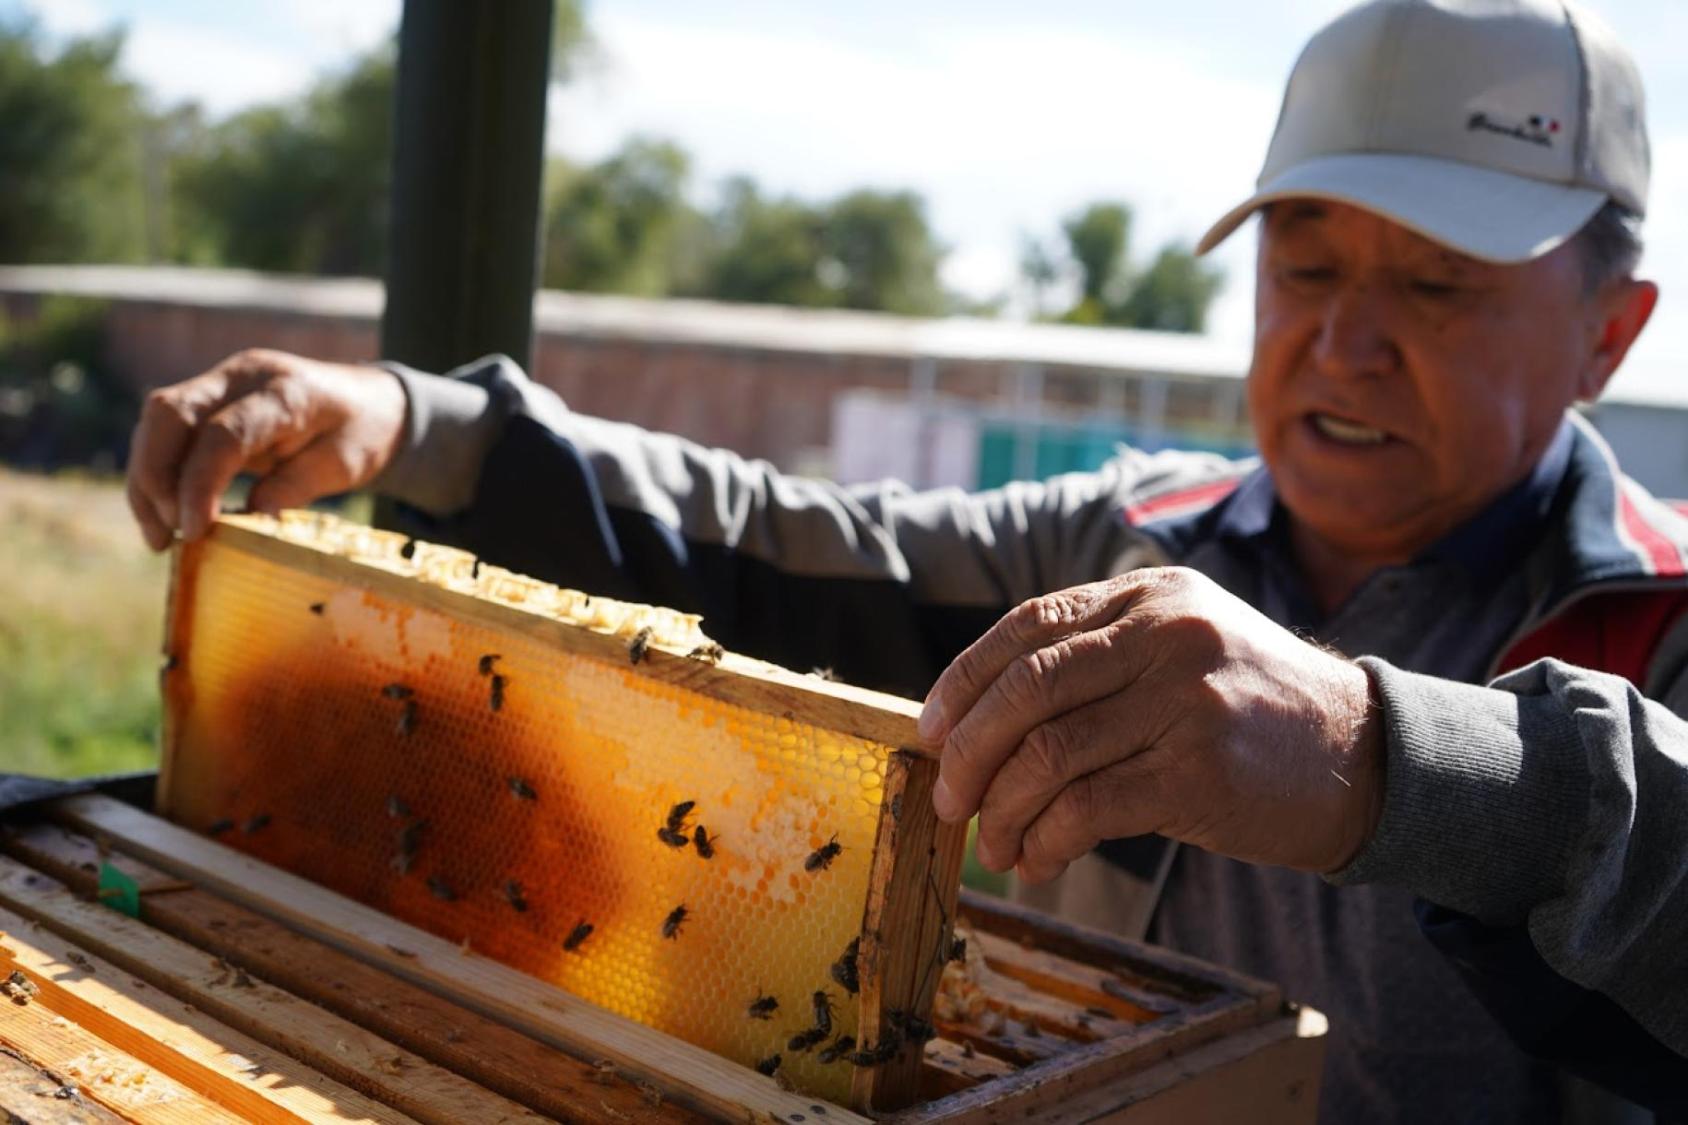 A beekeeper in a grey cap lifts a wooden frame with bees and honey